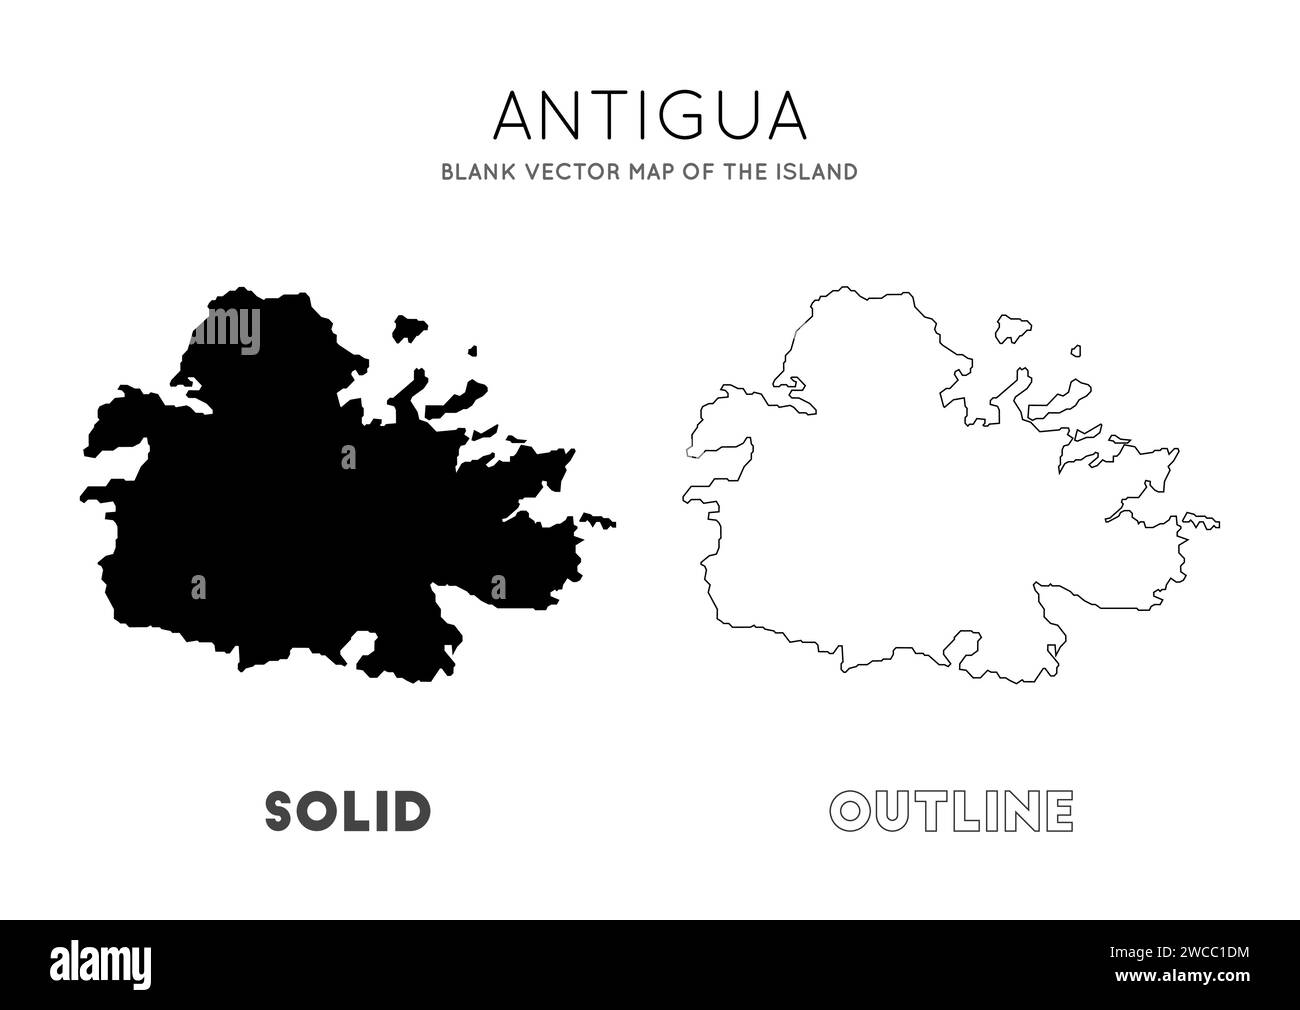 Antigua map. Blank vector map of the Island. Borders of Antigua for your infographic. Vector illustration. Stock Vector